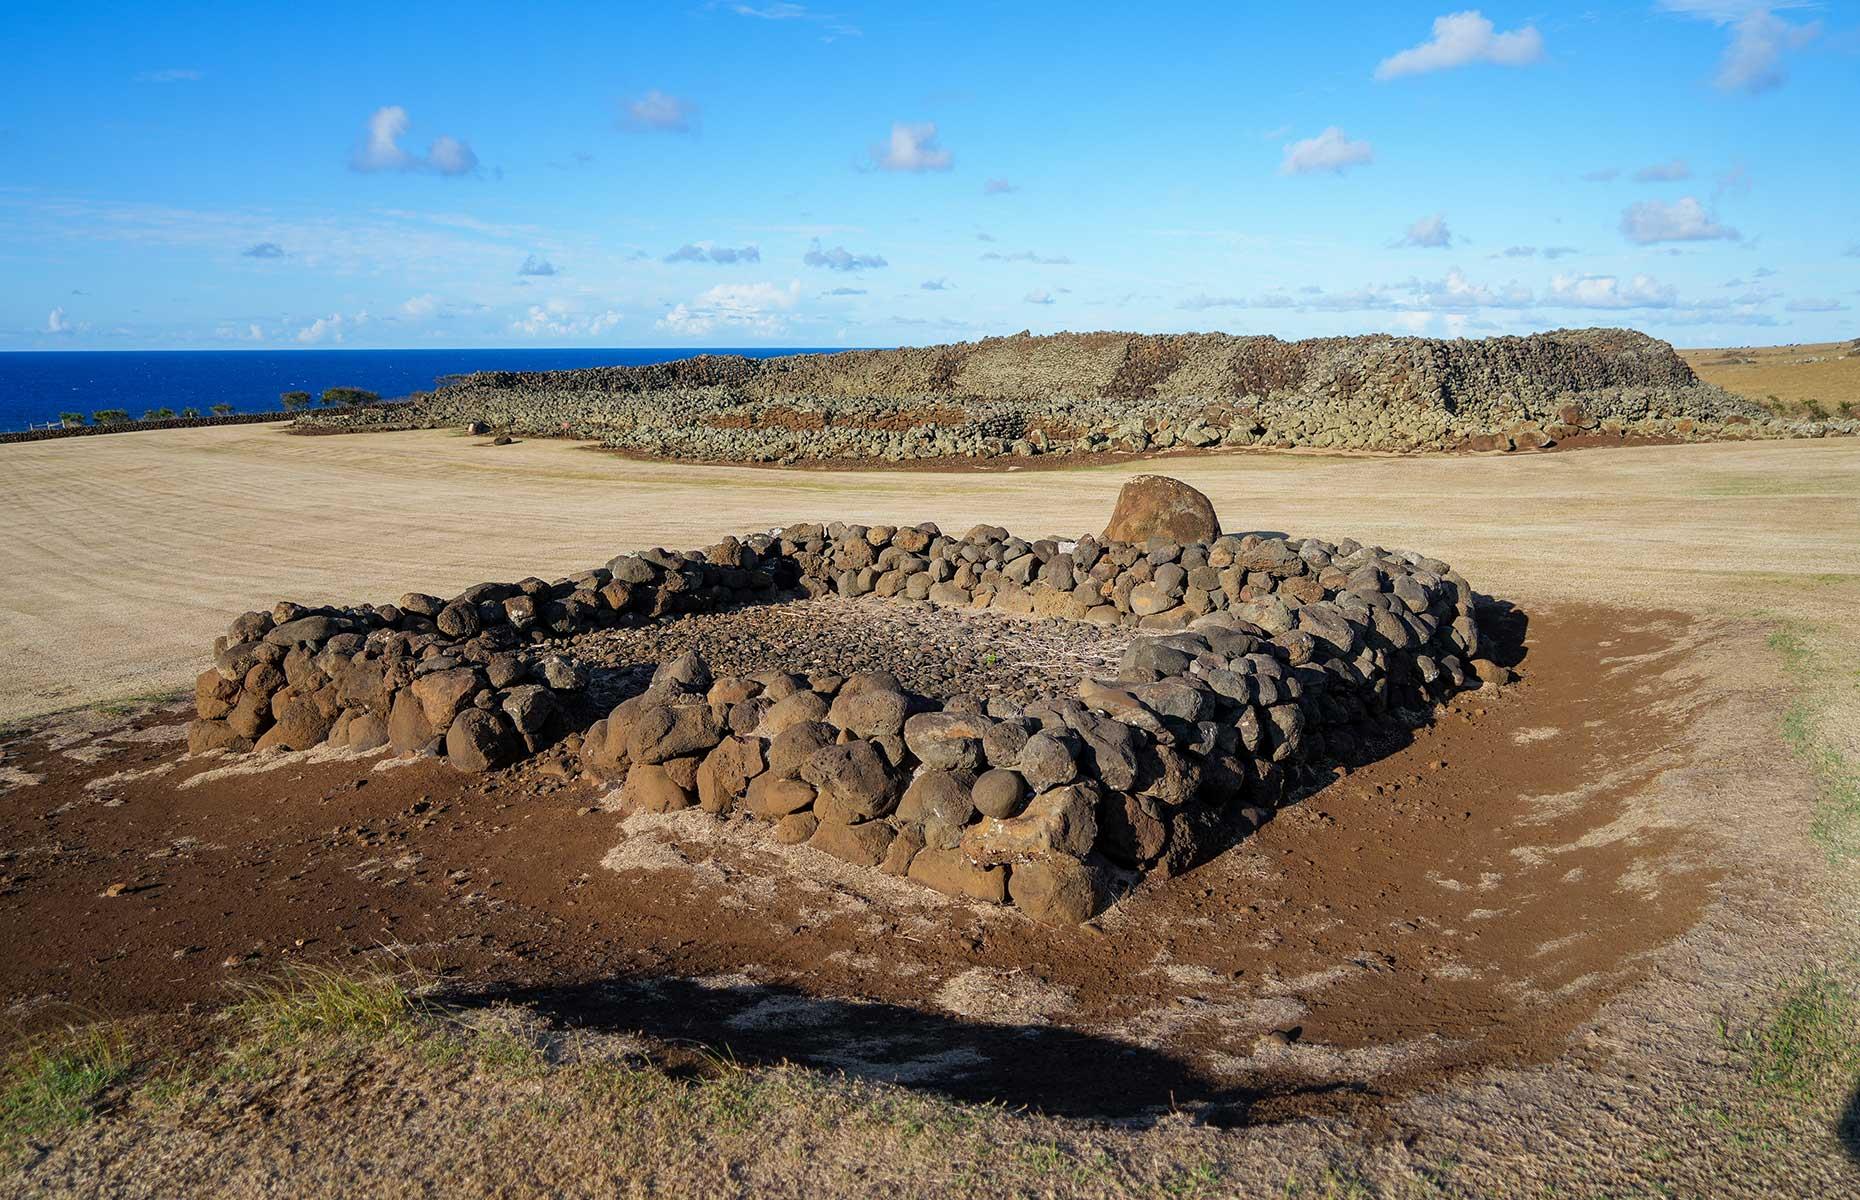 <p><a href="https://www.nps.gov/places/mo-okini-heiau.htm">Mo’okini Heiau</a> is still a place of worship: a living, spiritual temple for Native Hawaiians. We don’t know for sure when it was built – oral histories vary between the 5th and 13th-14th centuries – but it was used for rituals involving <a href="https://www.hawaii-guide.com/big-island/sights/mookini_heiau">human sacrifice</a>, typically dedicated to the war god Ku. The Heiau is enclosed by stone walls which were constructed using a dry stacking technique creating a slanted rectangle shape. Open daily (except Wednesday) and free to visit, it’s best reached by following the trailhead – just don’t enter the sacred site itself.</p>